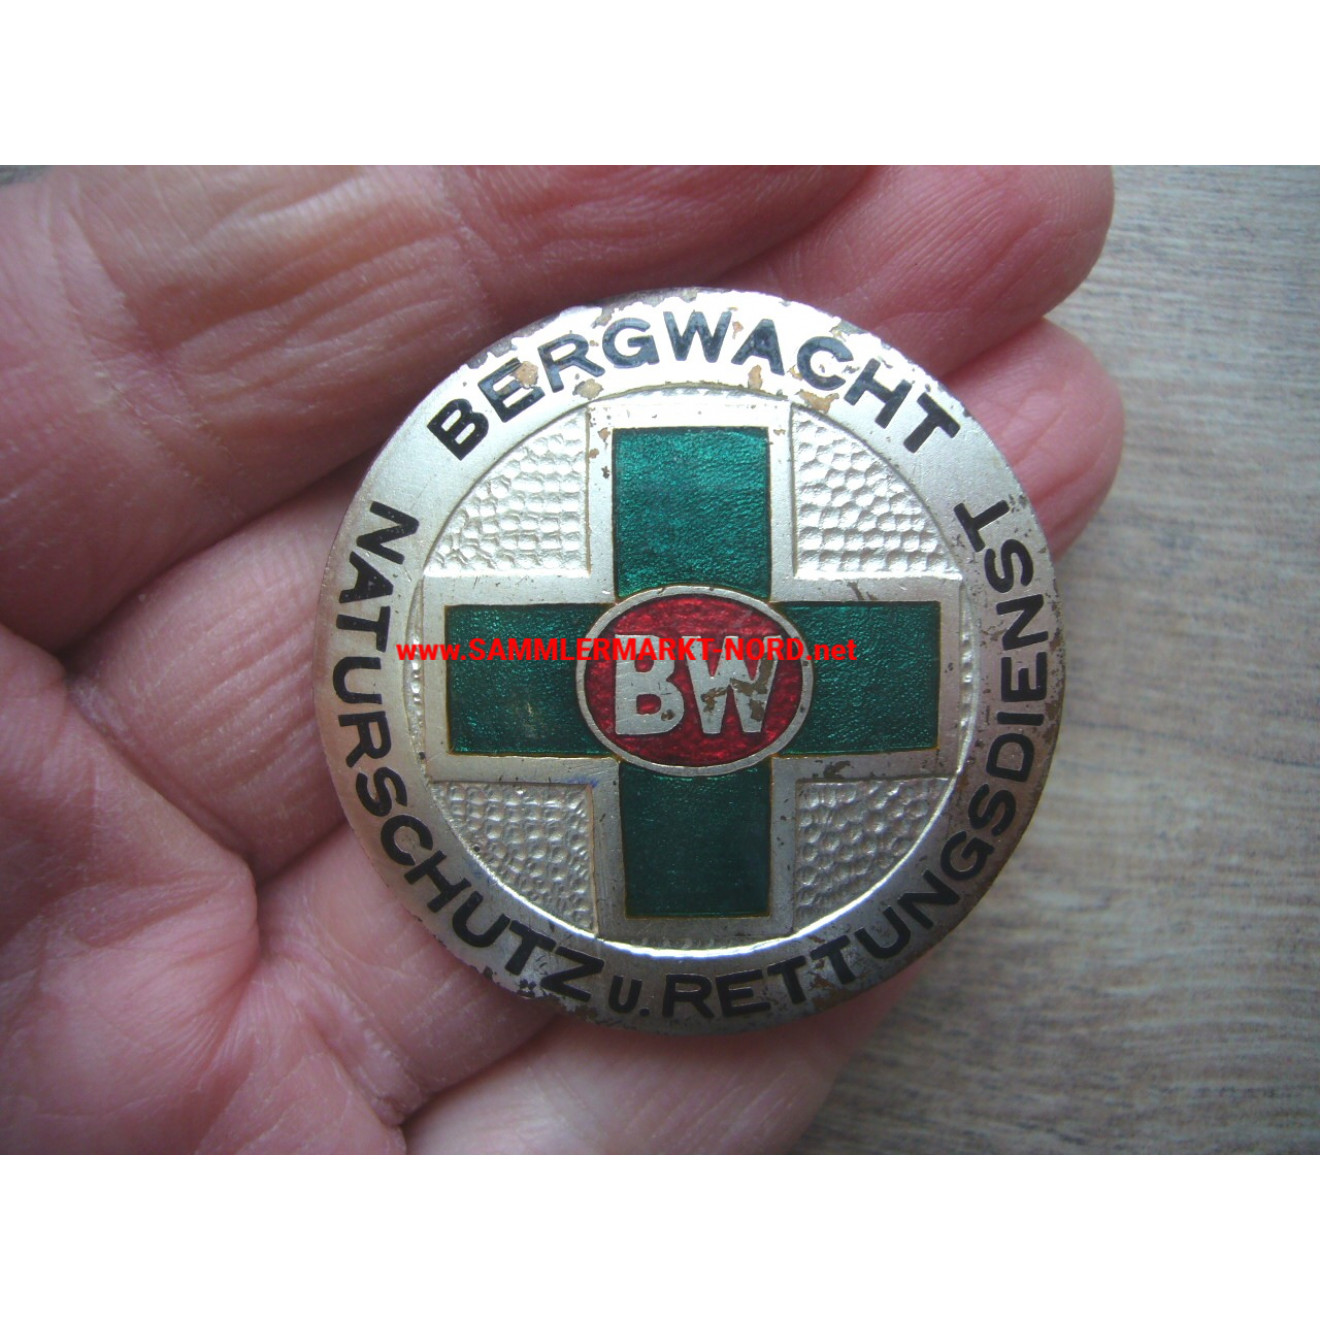 BW Bergwacht - Nature Conservation and Rescue Service - Large Service Badge (969)